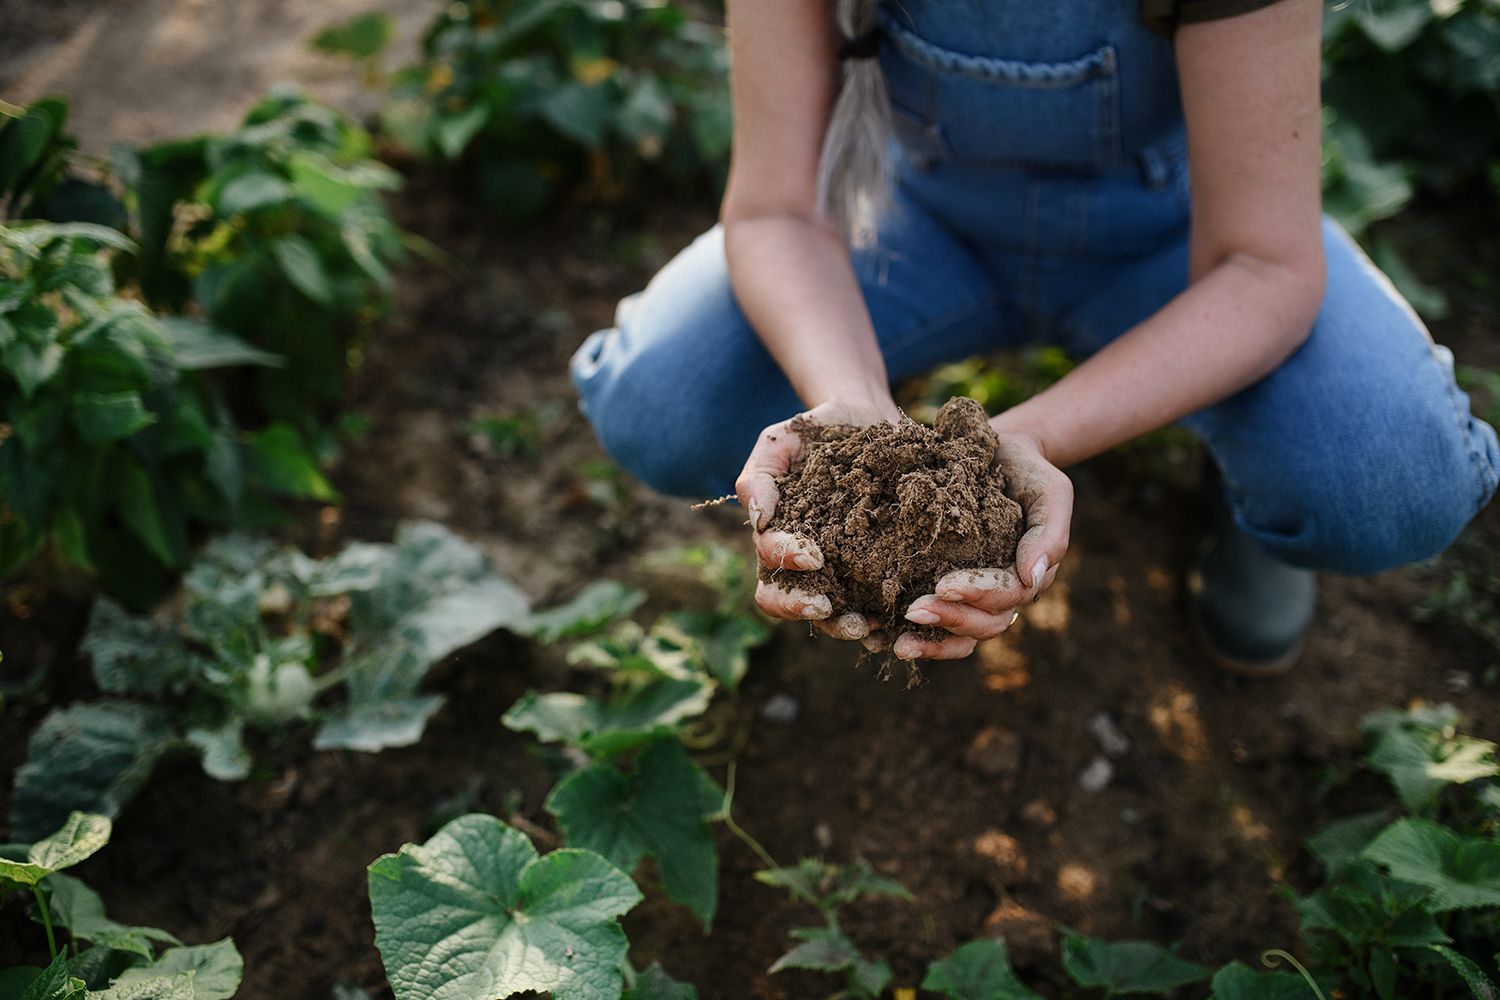 Person holding soil